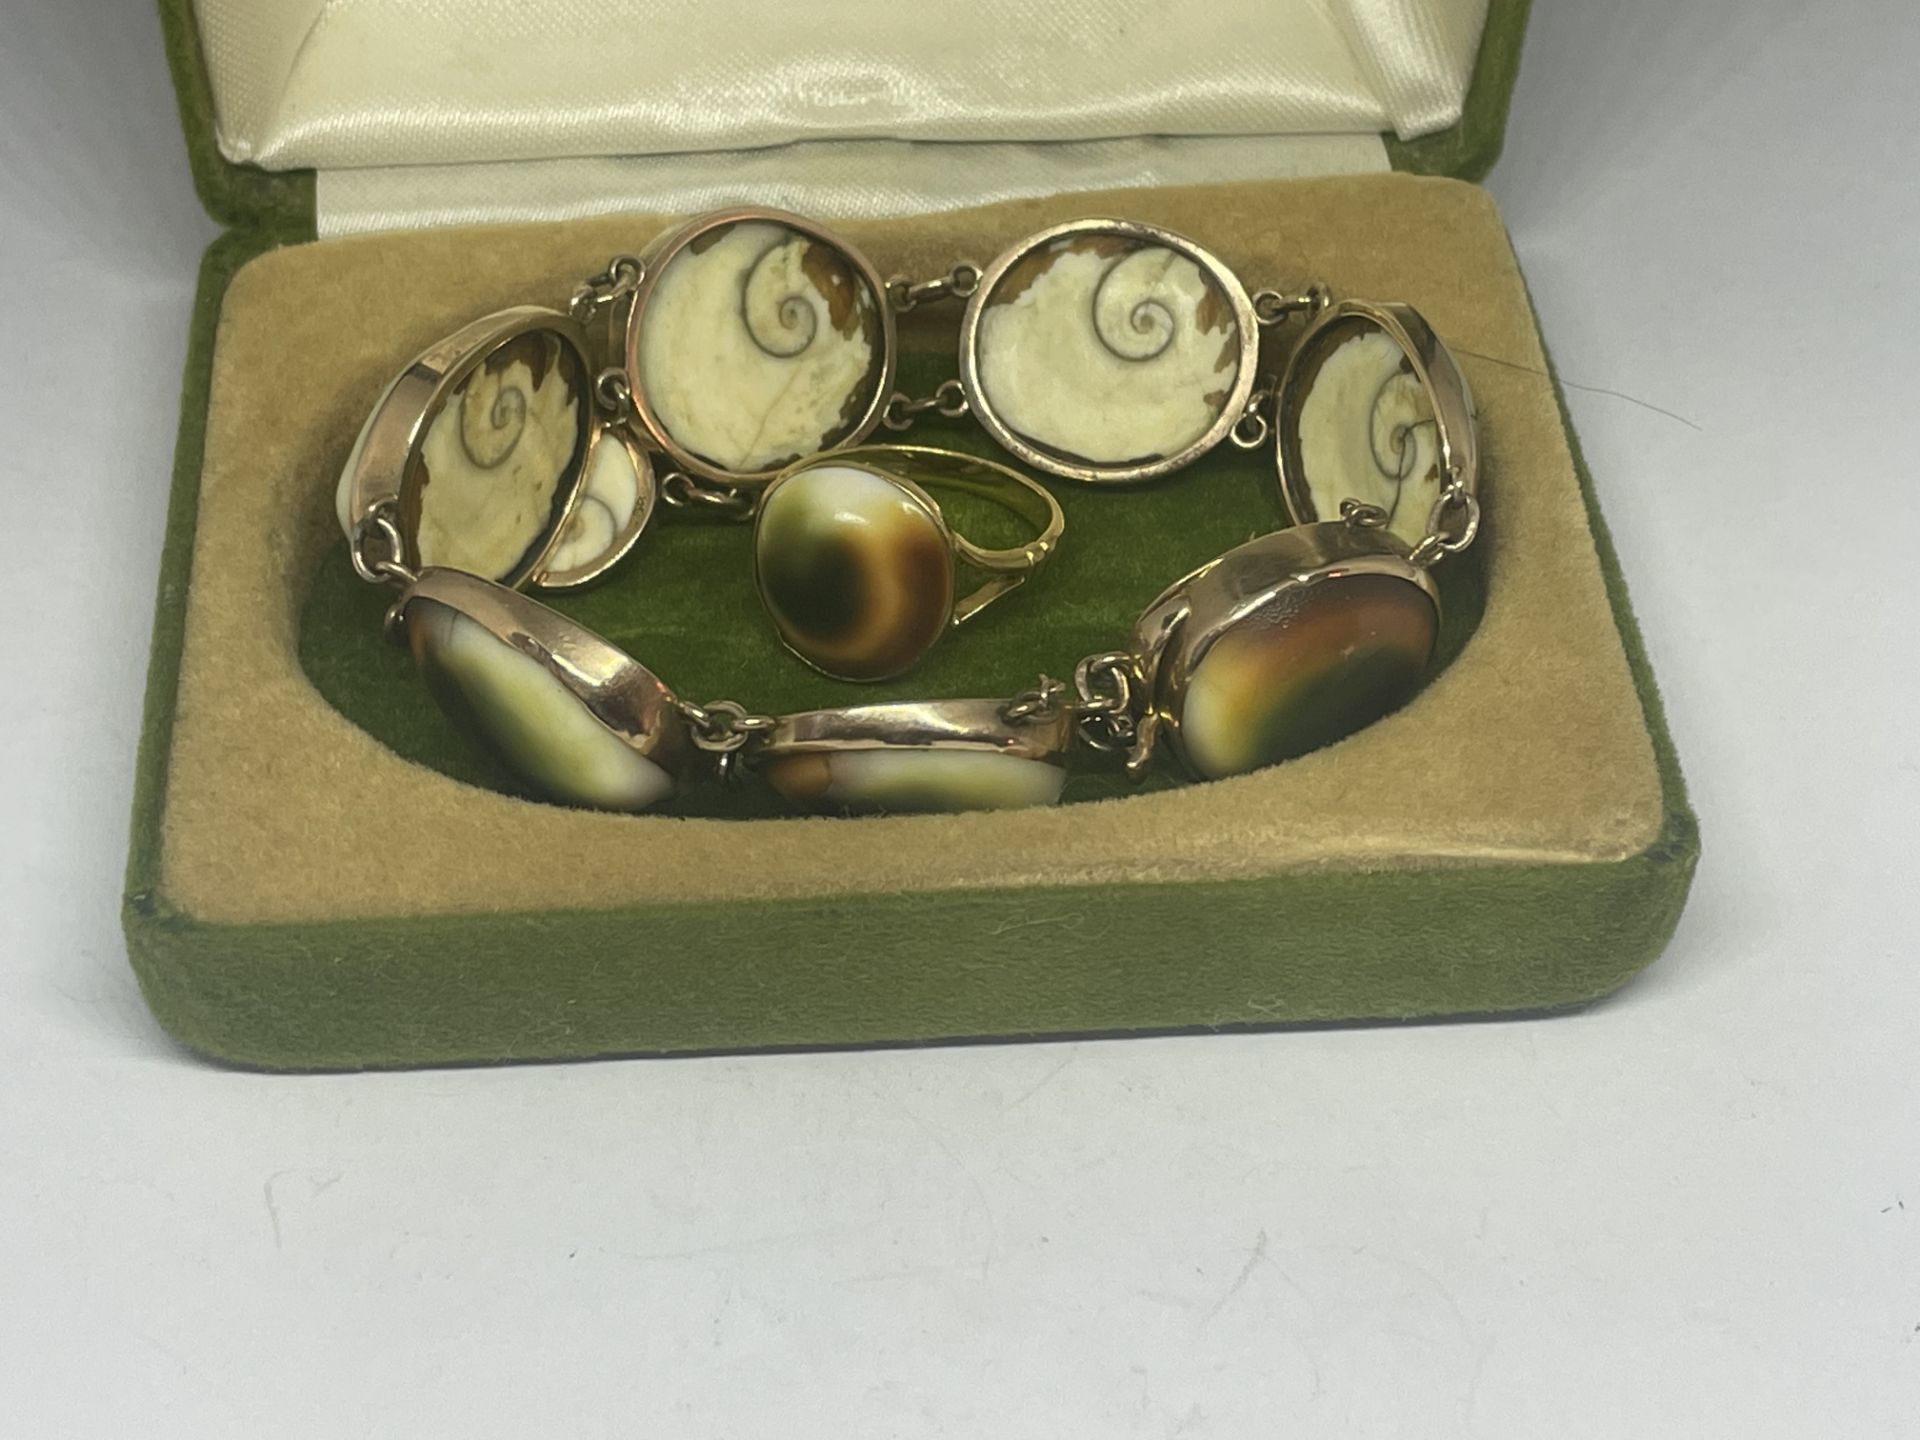 A 9 CARAT GOLD BRACELET WITH OPERCULUL SHELLS AND A MATCHING RING IN A PRESENTATION BOX - Image 4 of 4